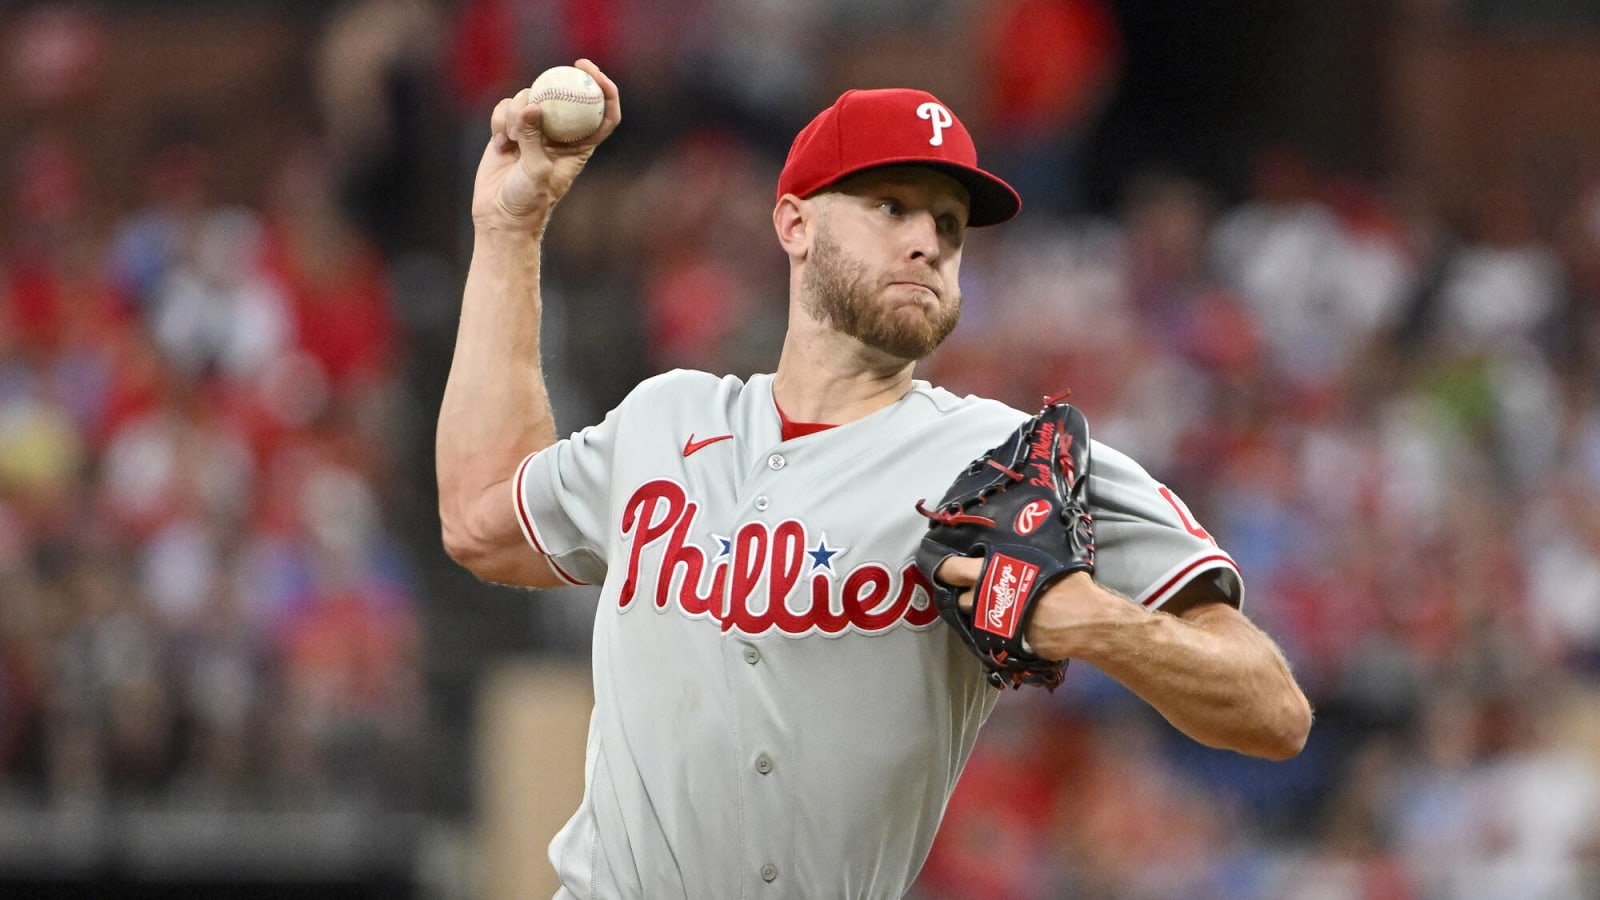 Phillies' Aces Wheeler, Nola Not Included on NL All-Star Roster